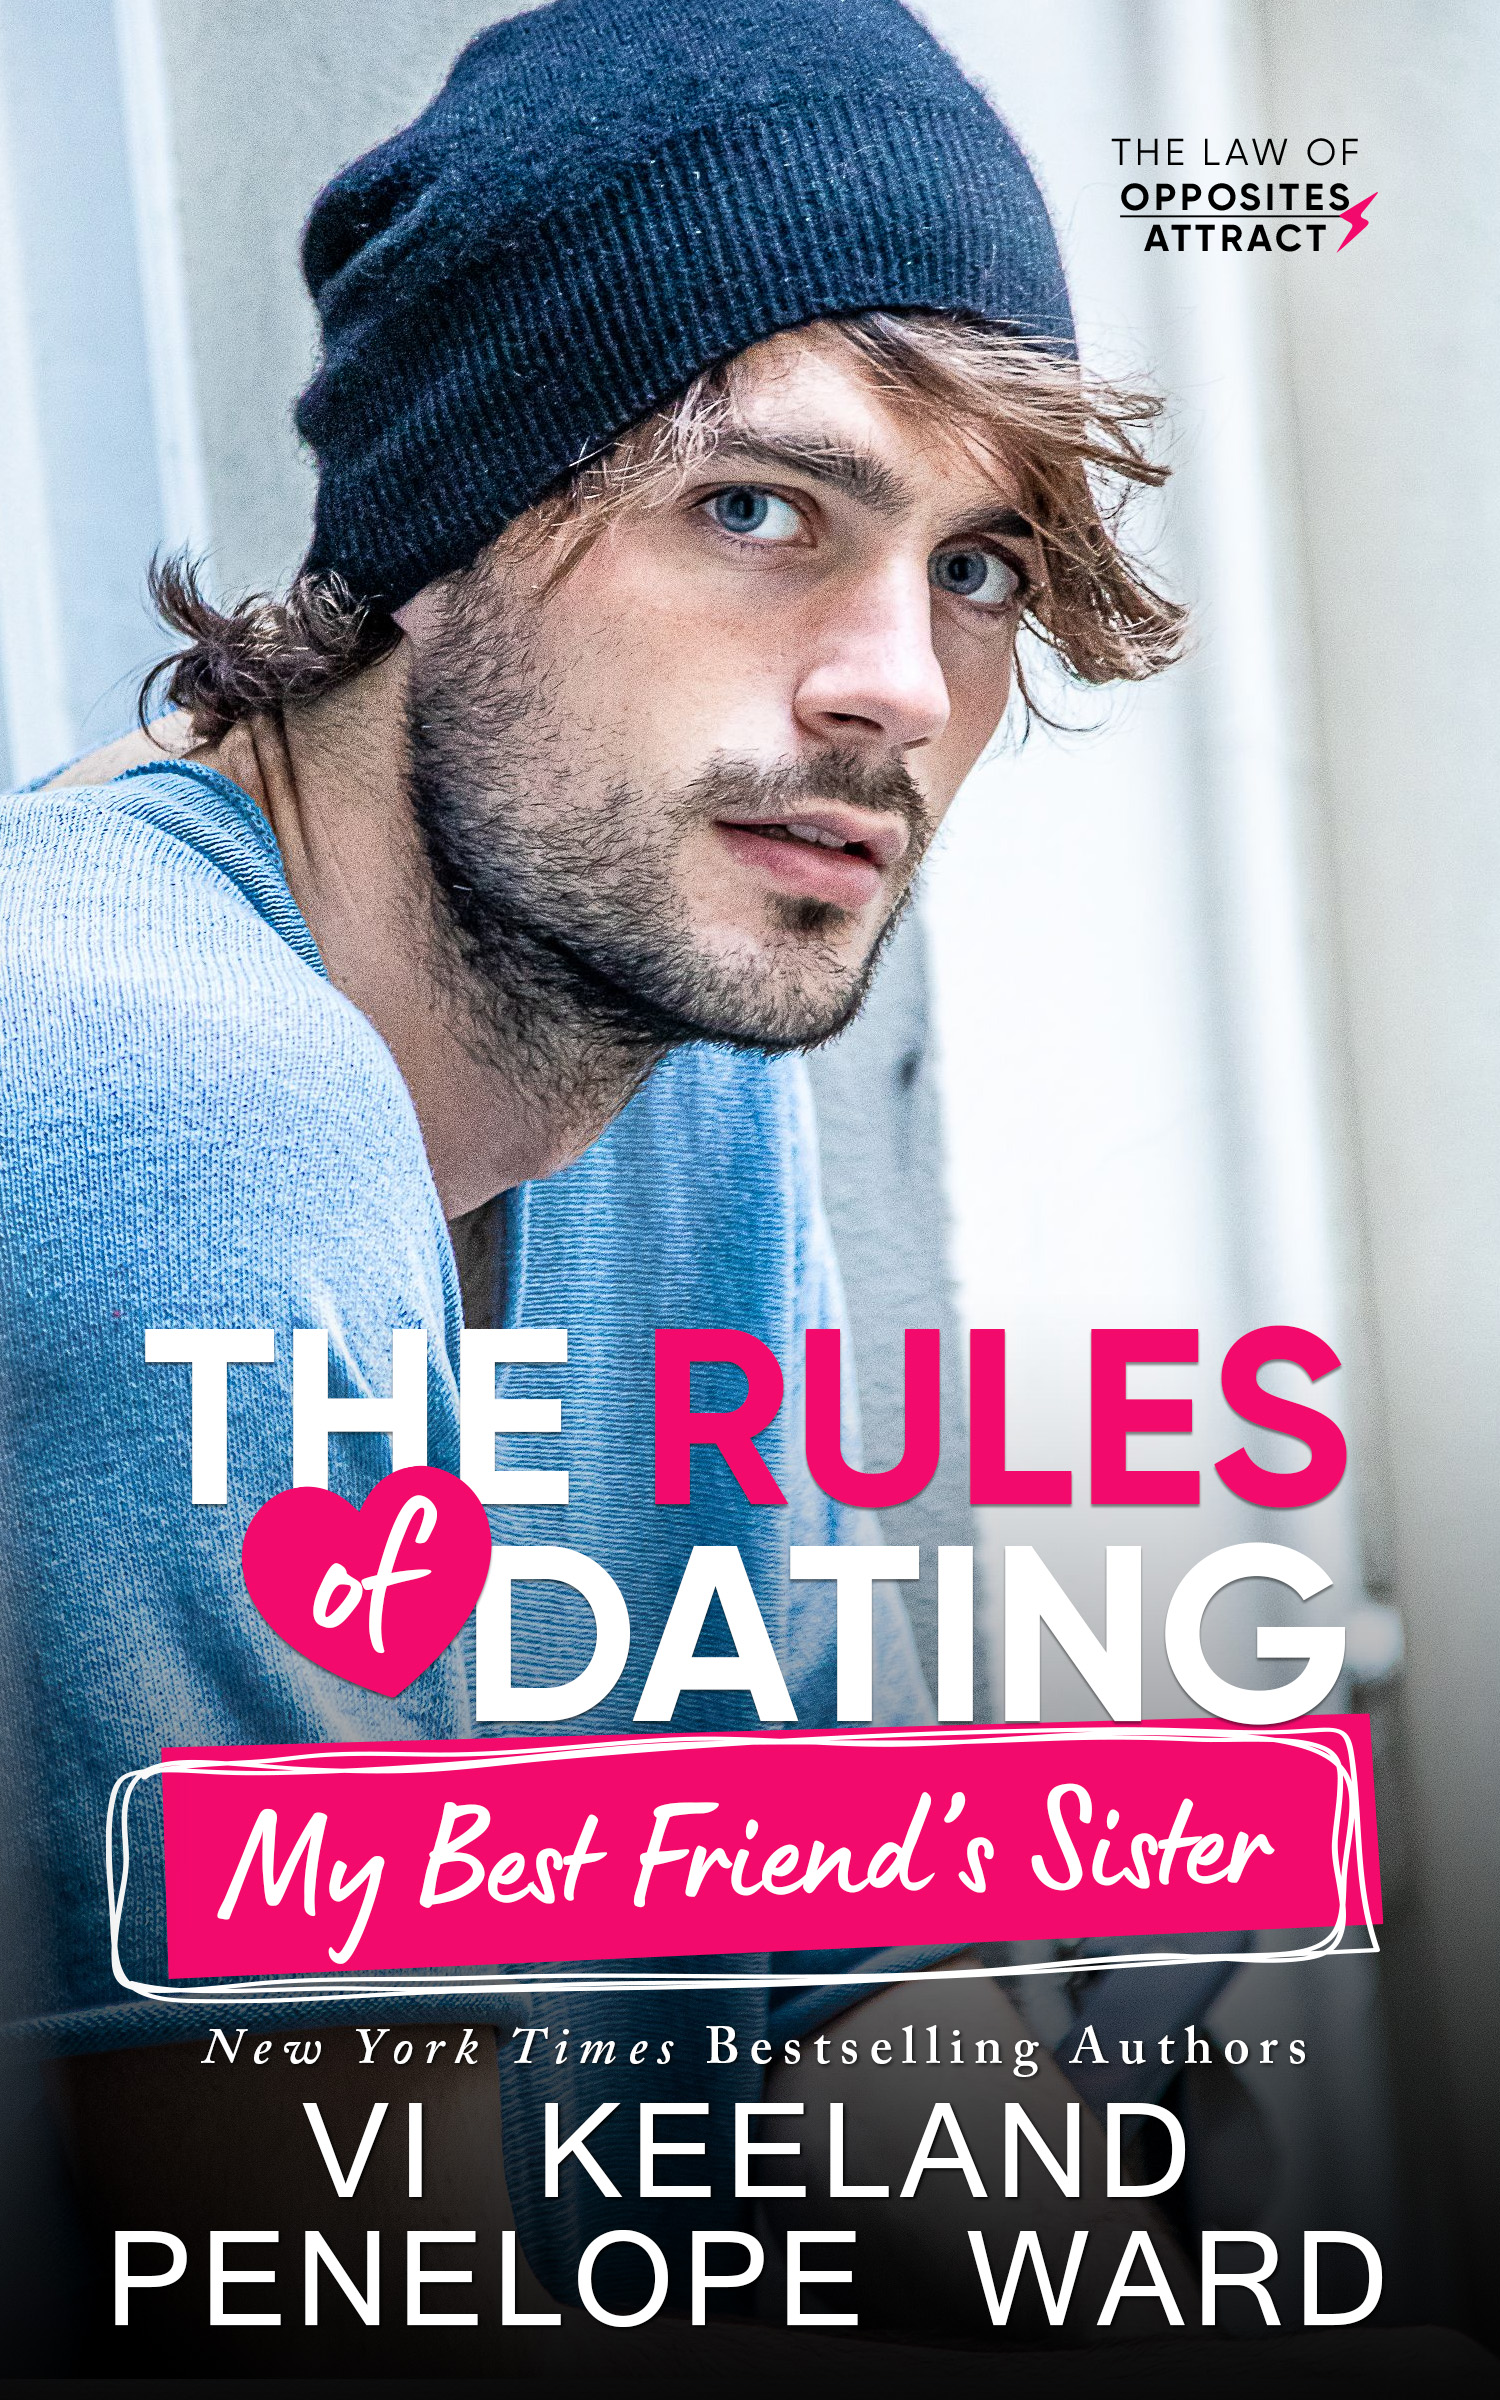 Release Blitz- The Rules of Dating My Best Friends Sister by Vi Keeland and Penelope Ward pic